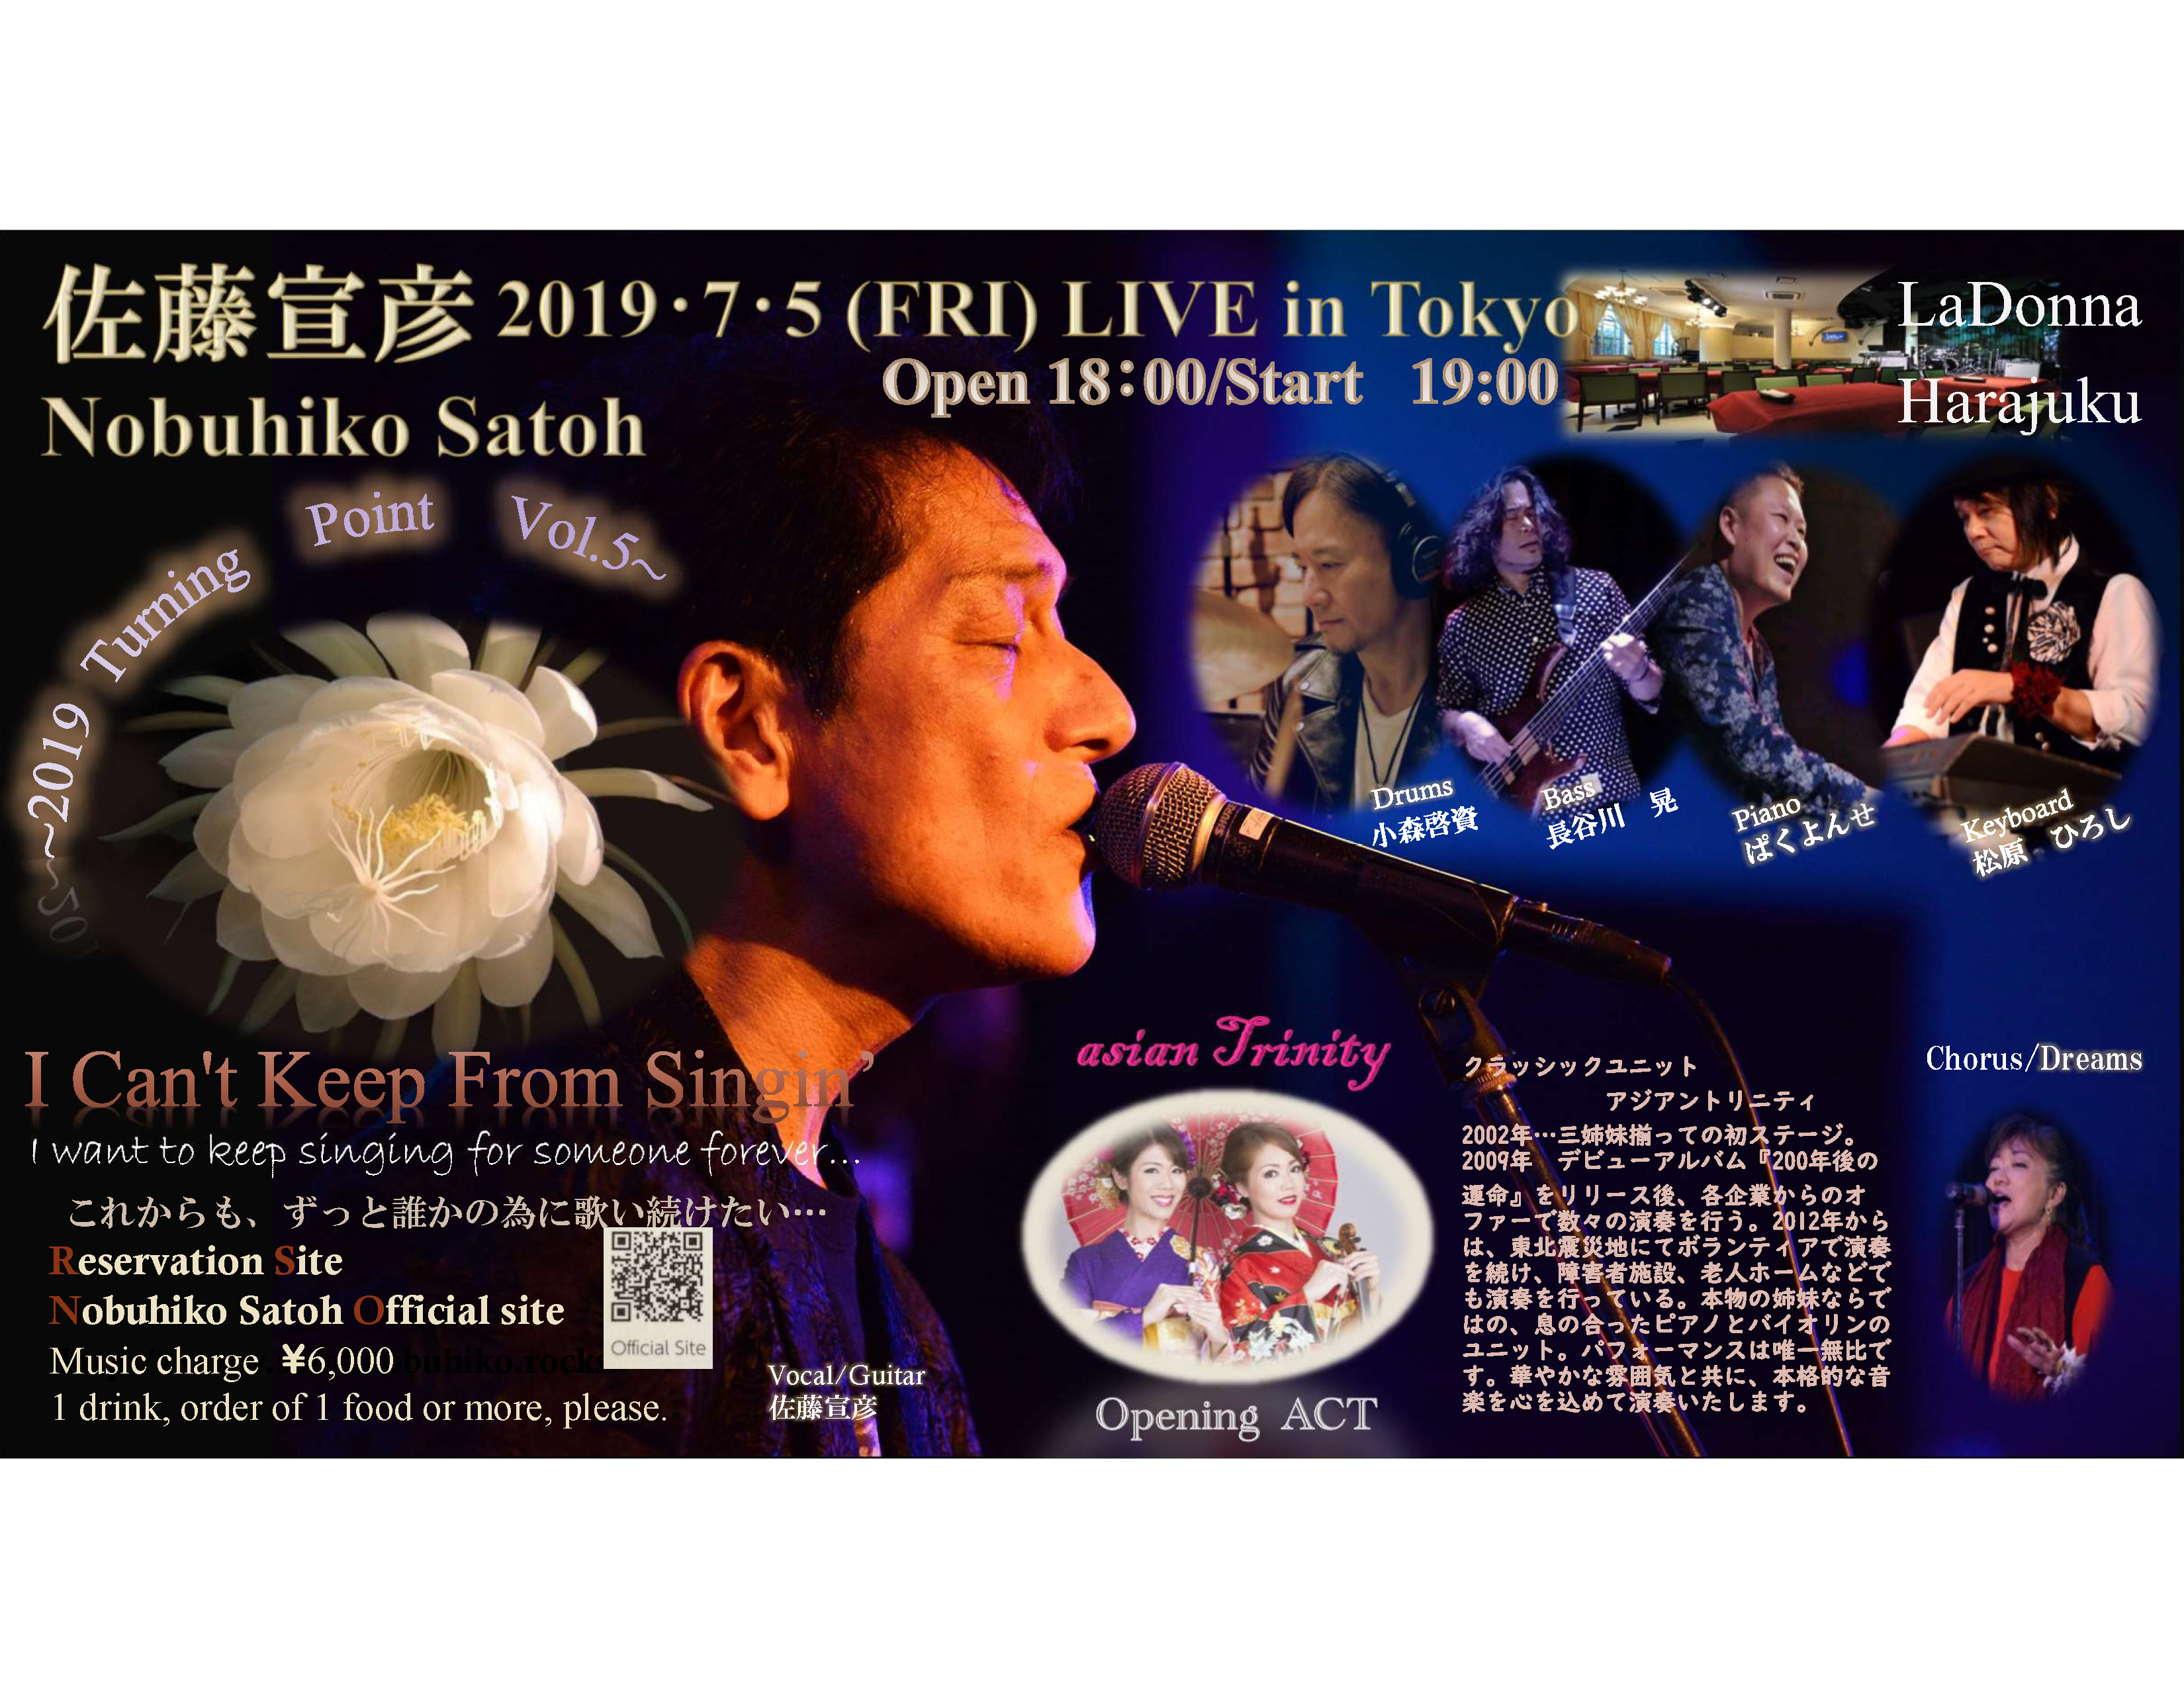 Nobuhiko Satoh LIVE in Tokyo ～2019 Turning Point Vol.5～  I Can't Keep From Singin’